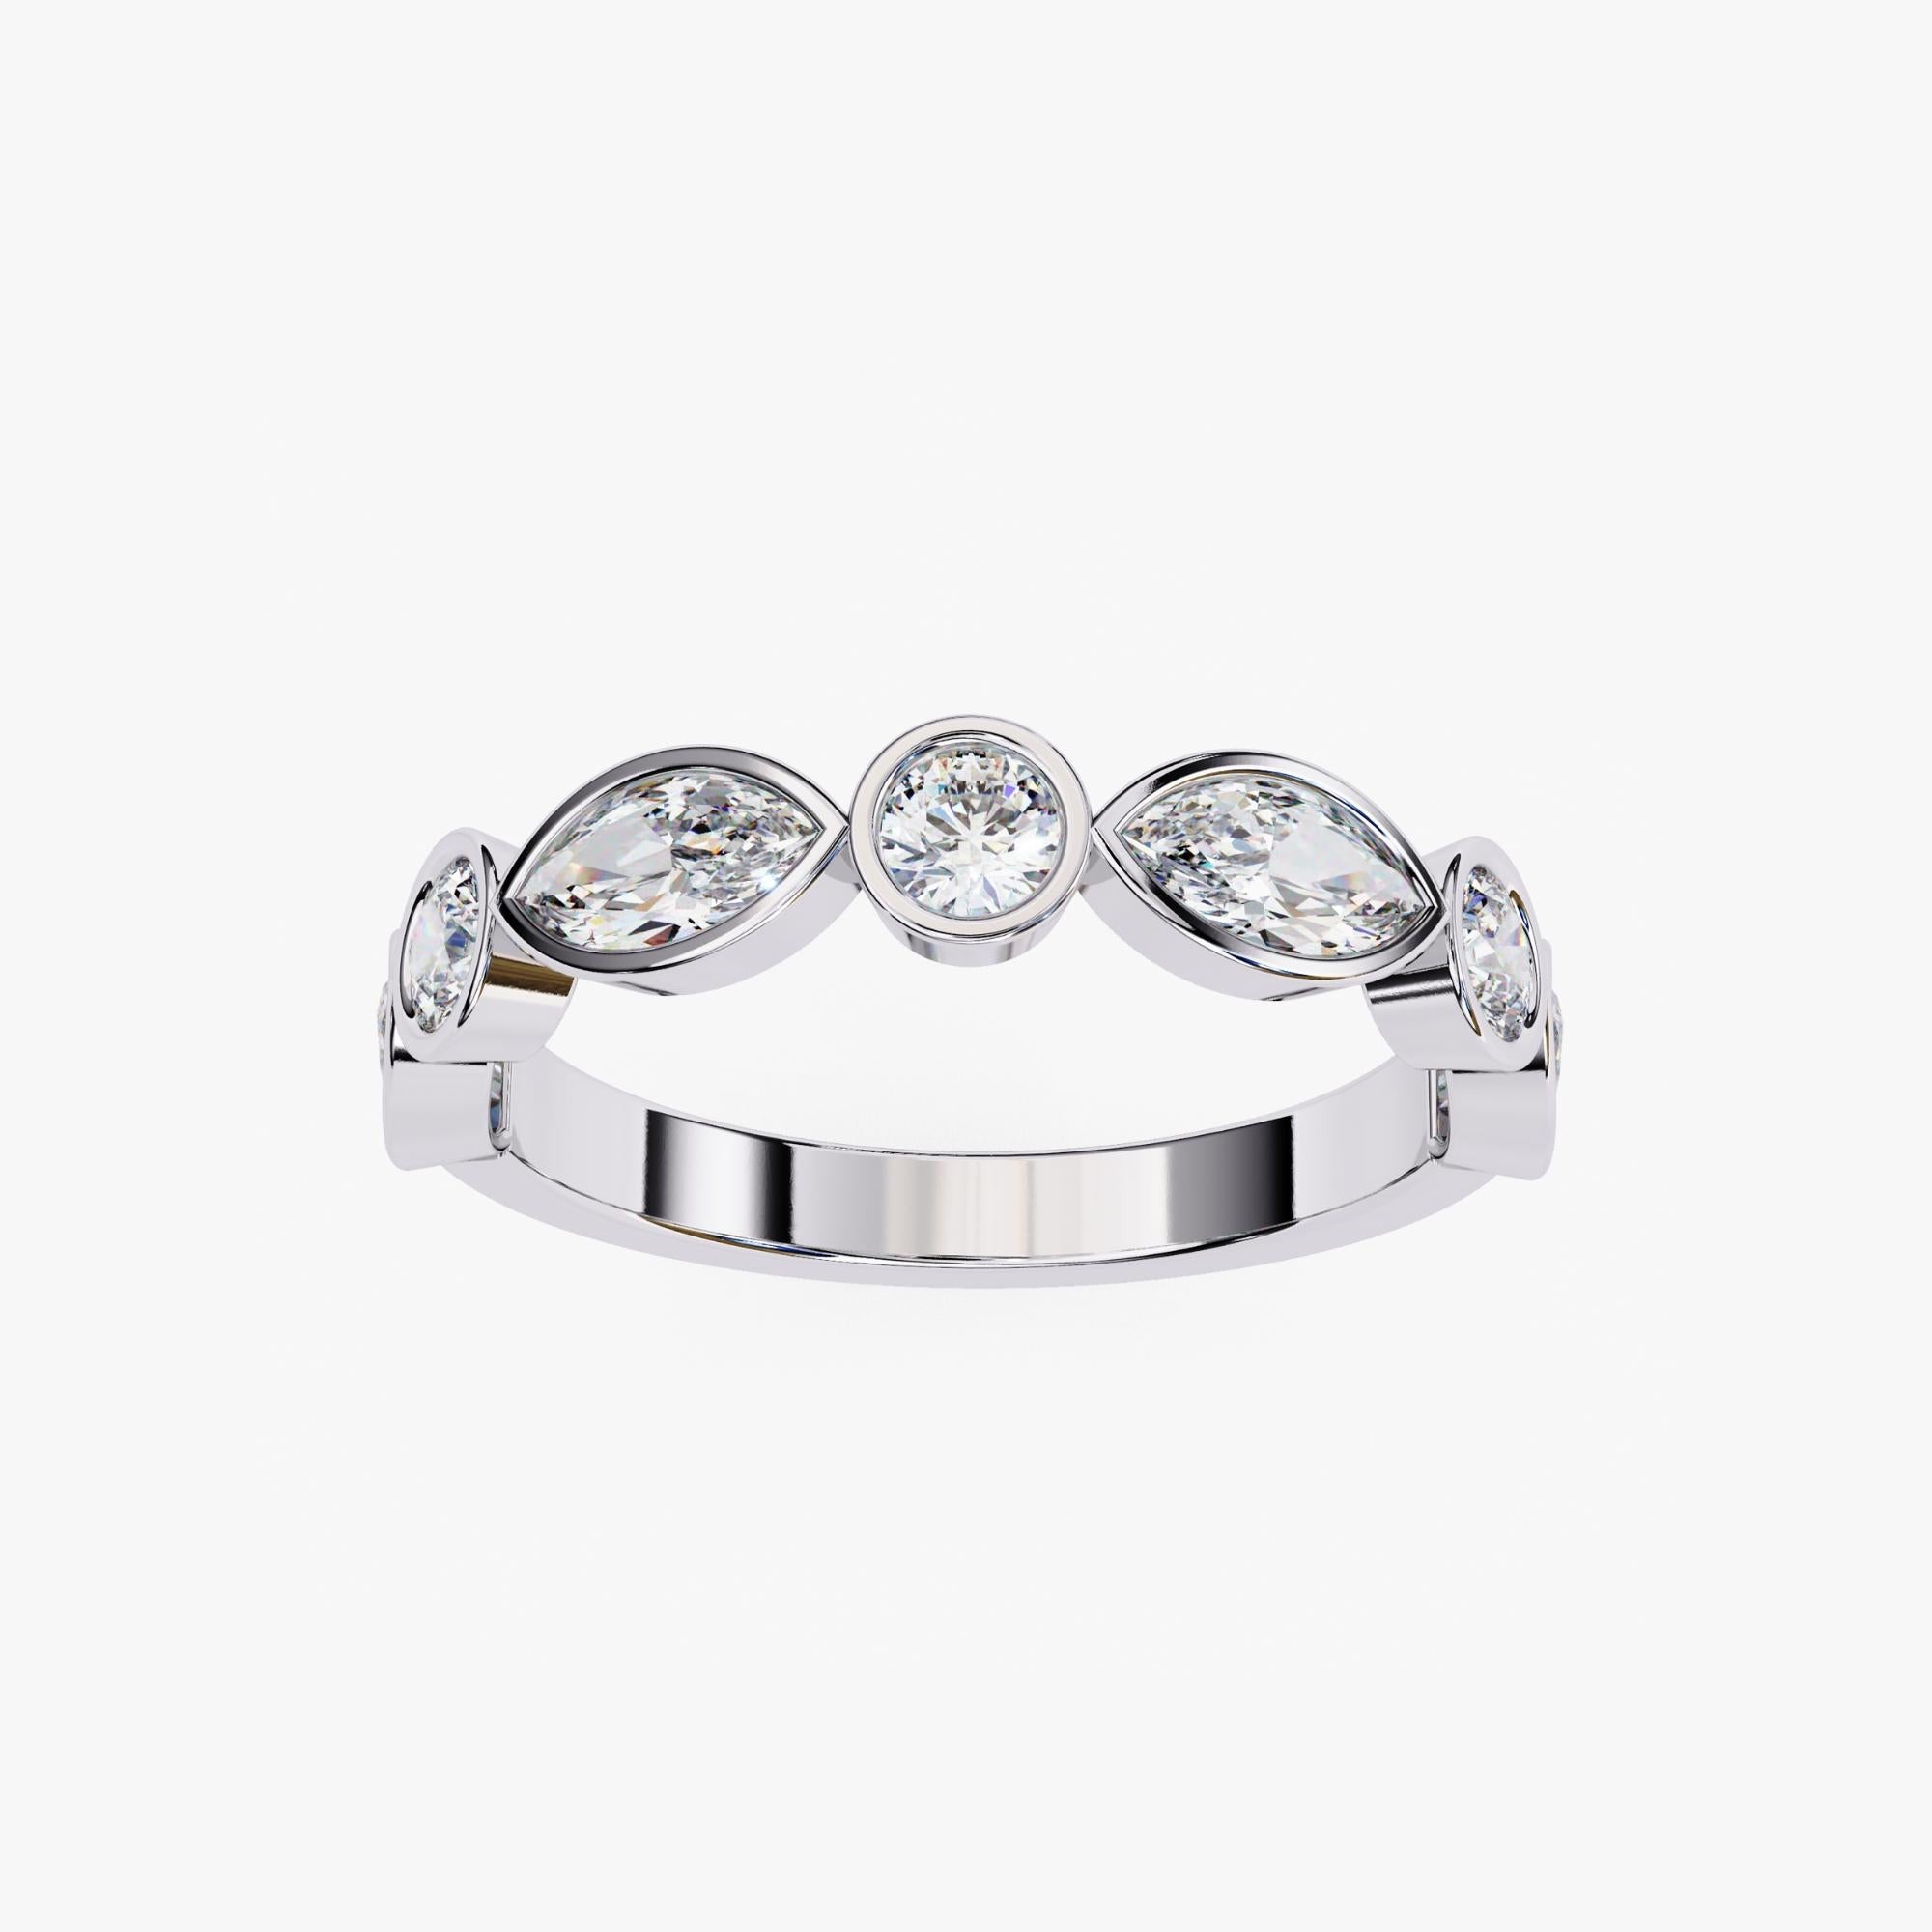 Item Code: AD271
Division: Natural Diamond
Collection: Classics
Metal Type: 14K Gold, White Gold
You can request a switch in gold color to yellow or rose. We also provide gold with black rhodium. You can mention your preference through an inbox